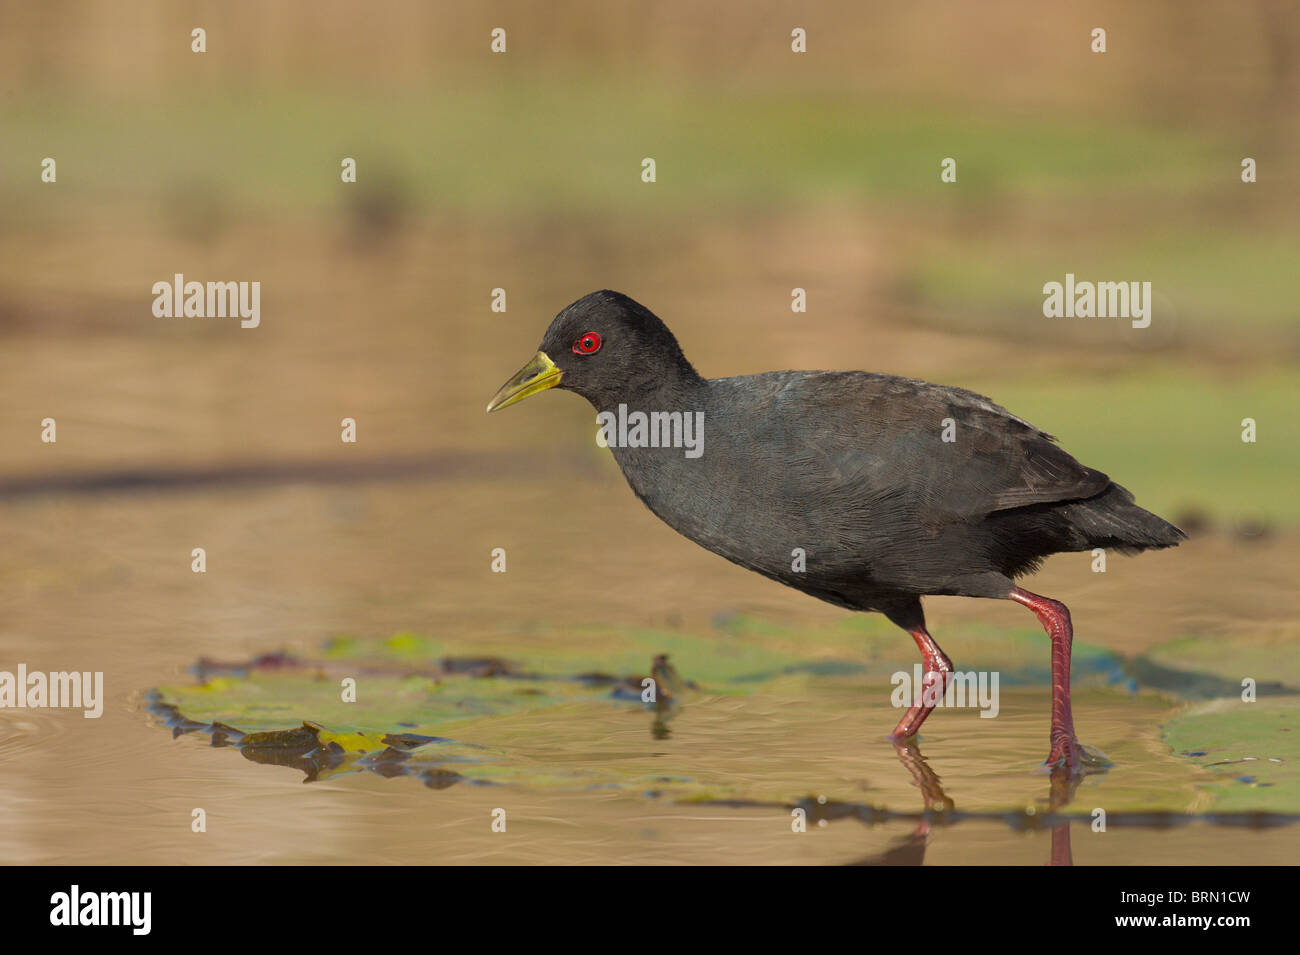 Black Crake standing on a lily pad Stock Photo